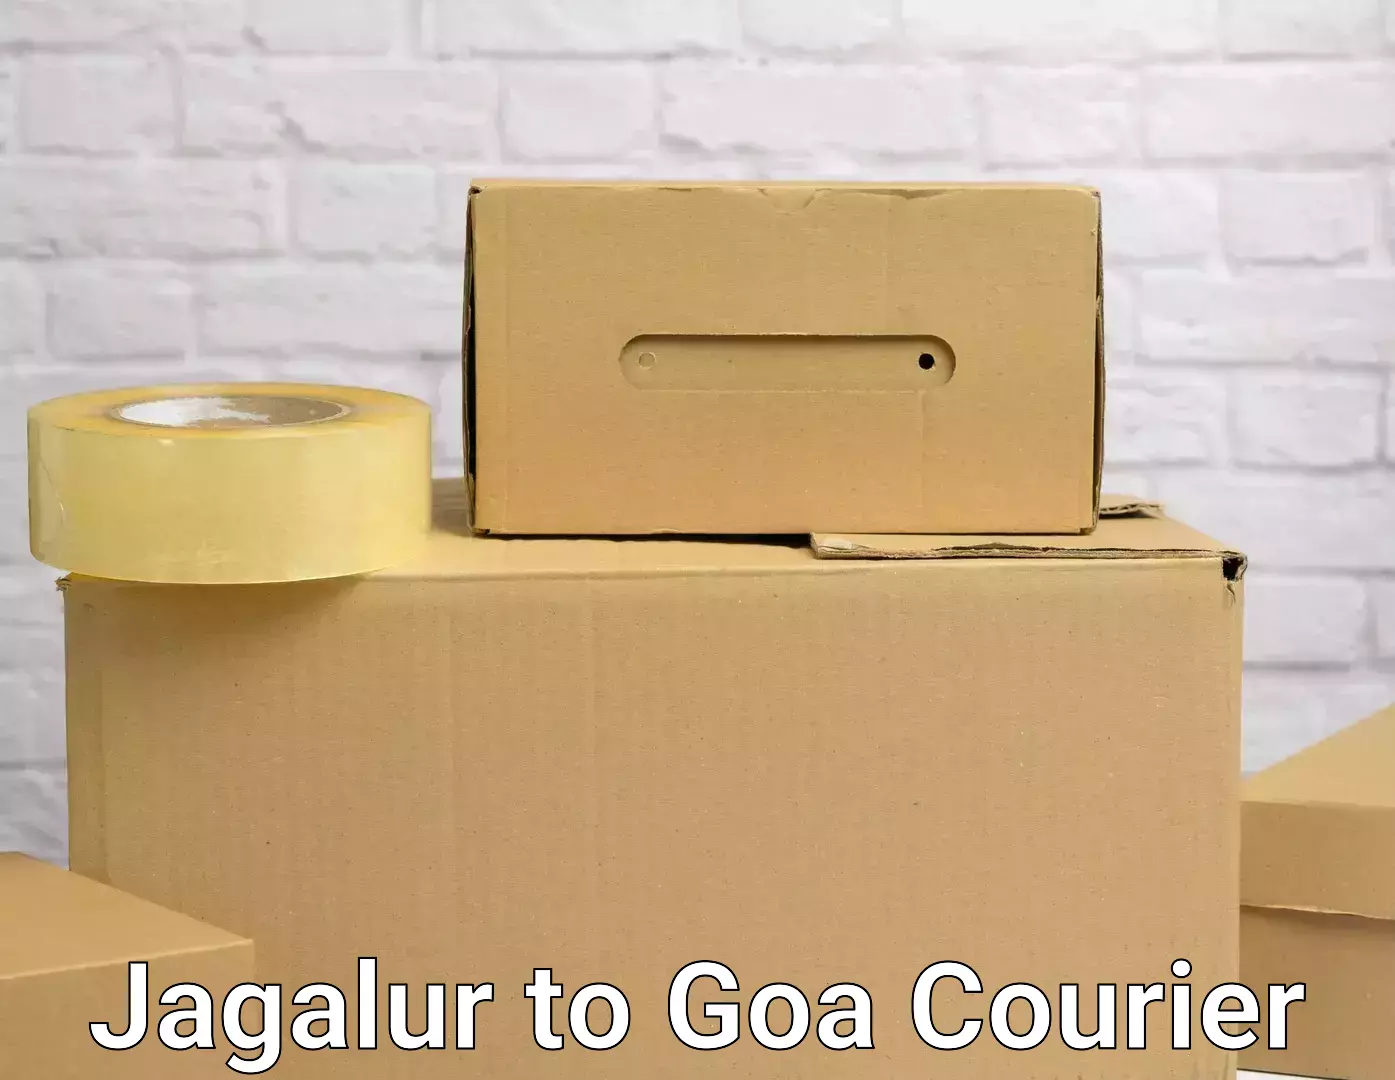 Efficient moving company Jagalur to Goa